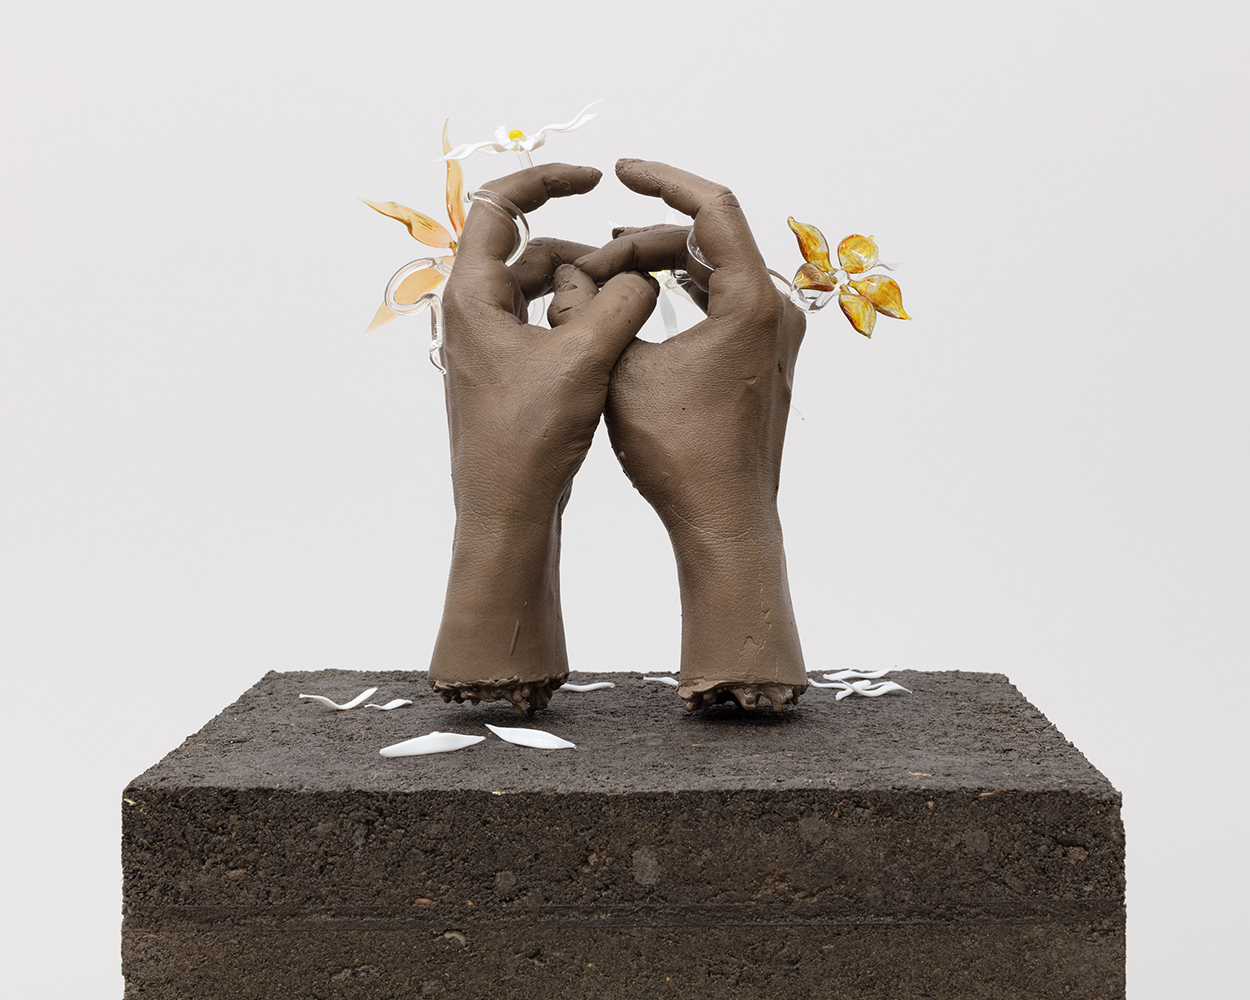 On a plinth amde of dirt, two bronze hands create interlinking circles with their middle fingers and thumbs. Delicate glass flowers encircle both, and leave petals in the dirt.